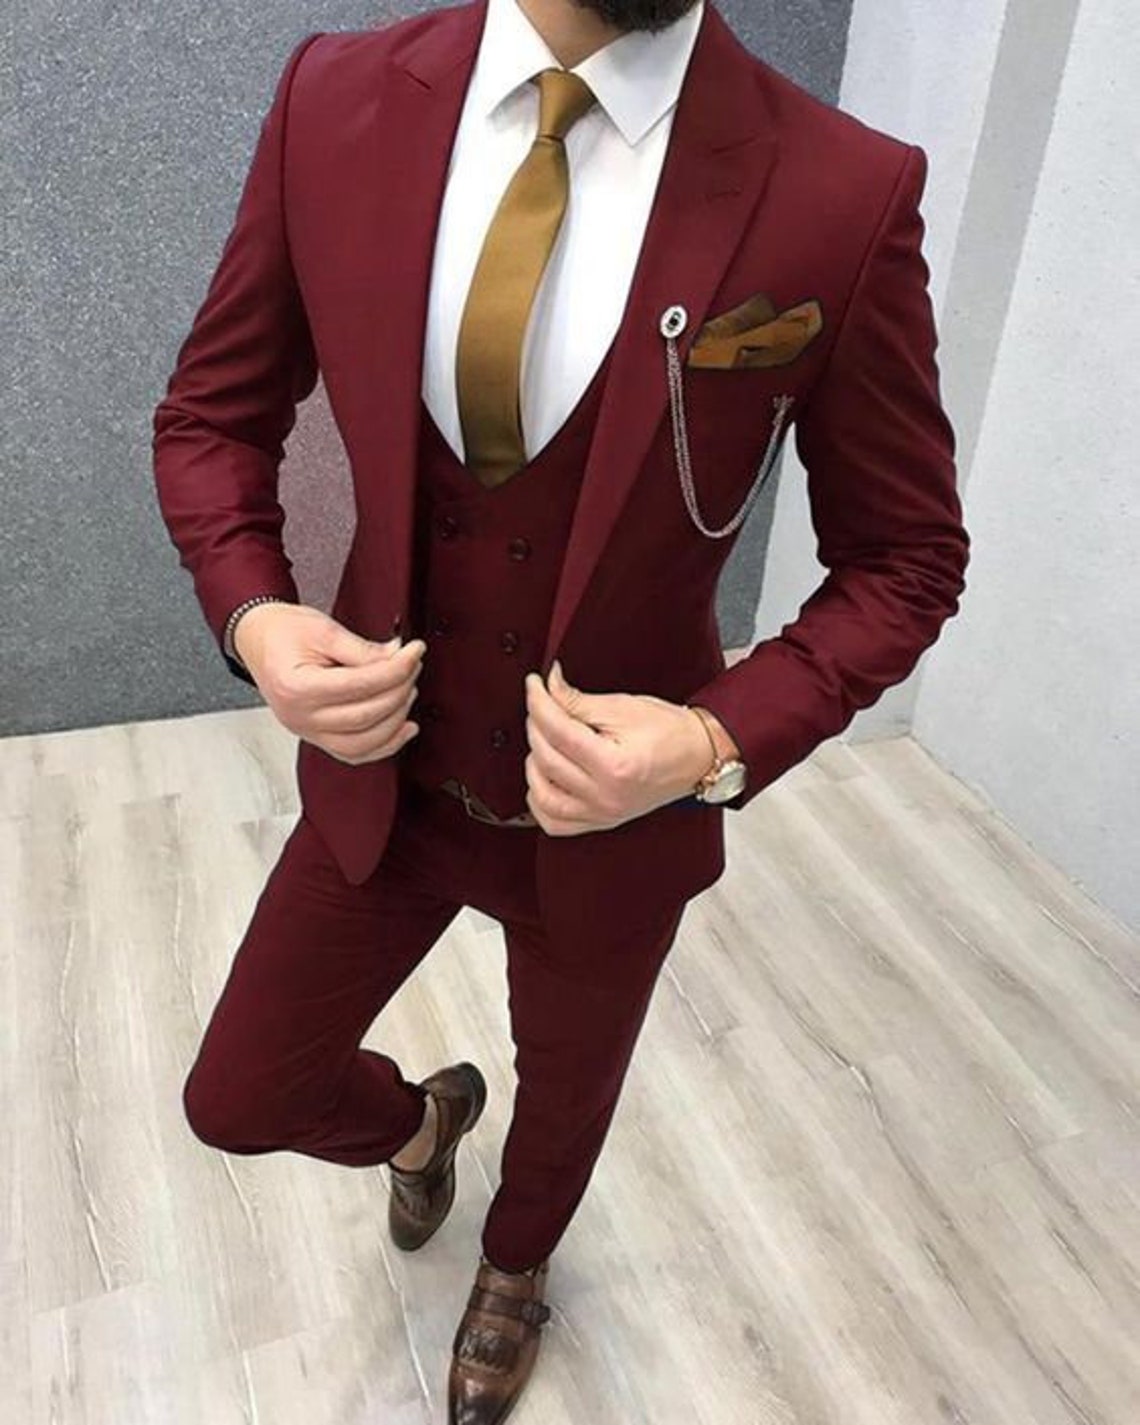 Men Suits Red Formal Fashion Men Suits 3 Piece Wedding Groom | Etsy